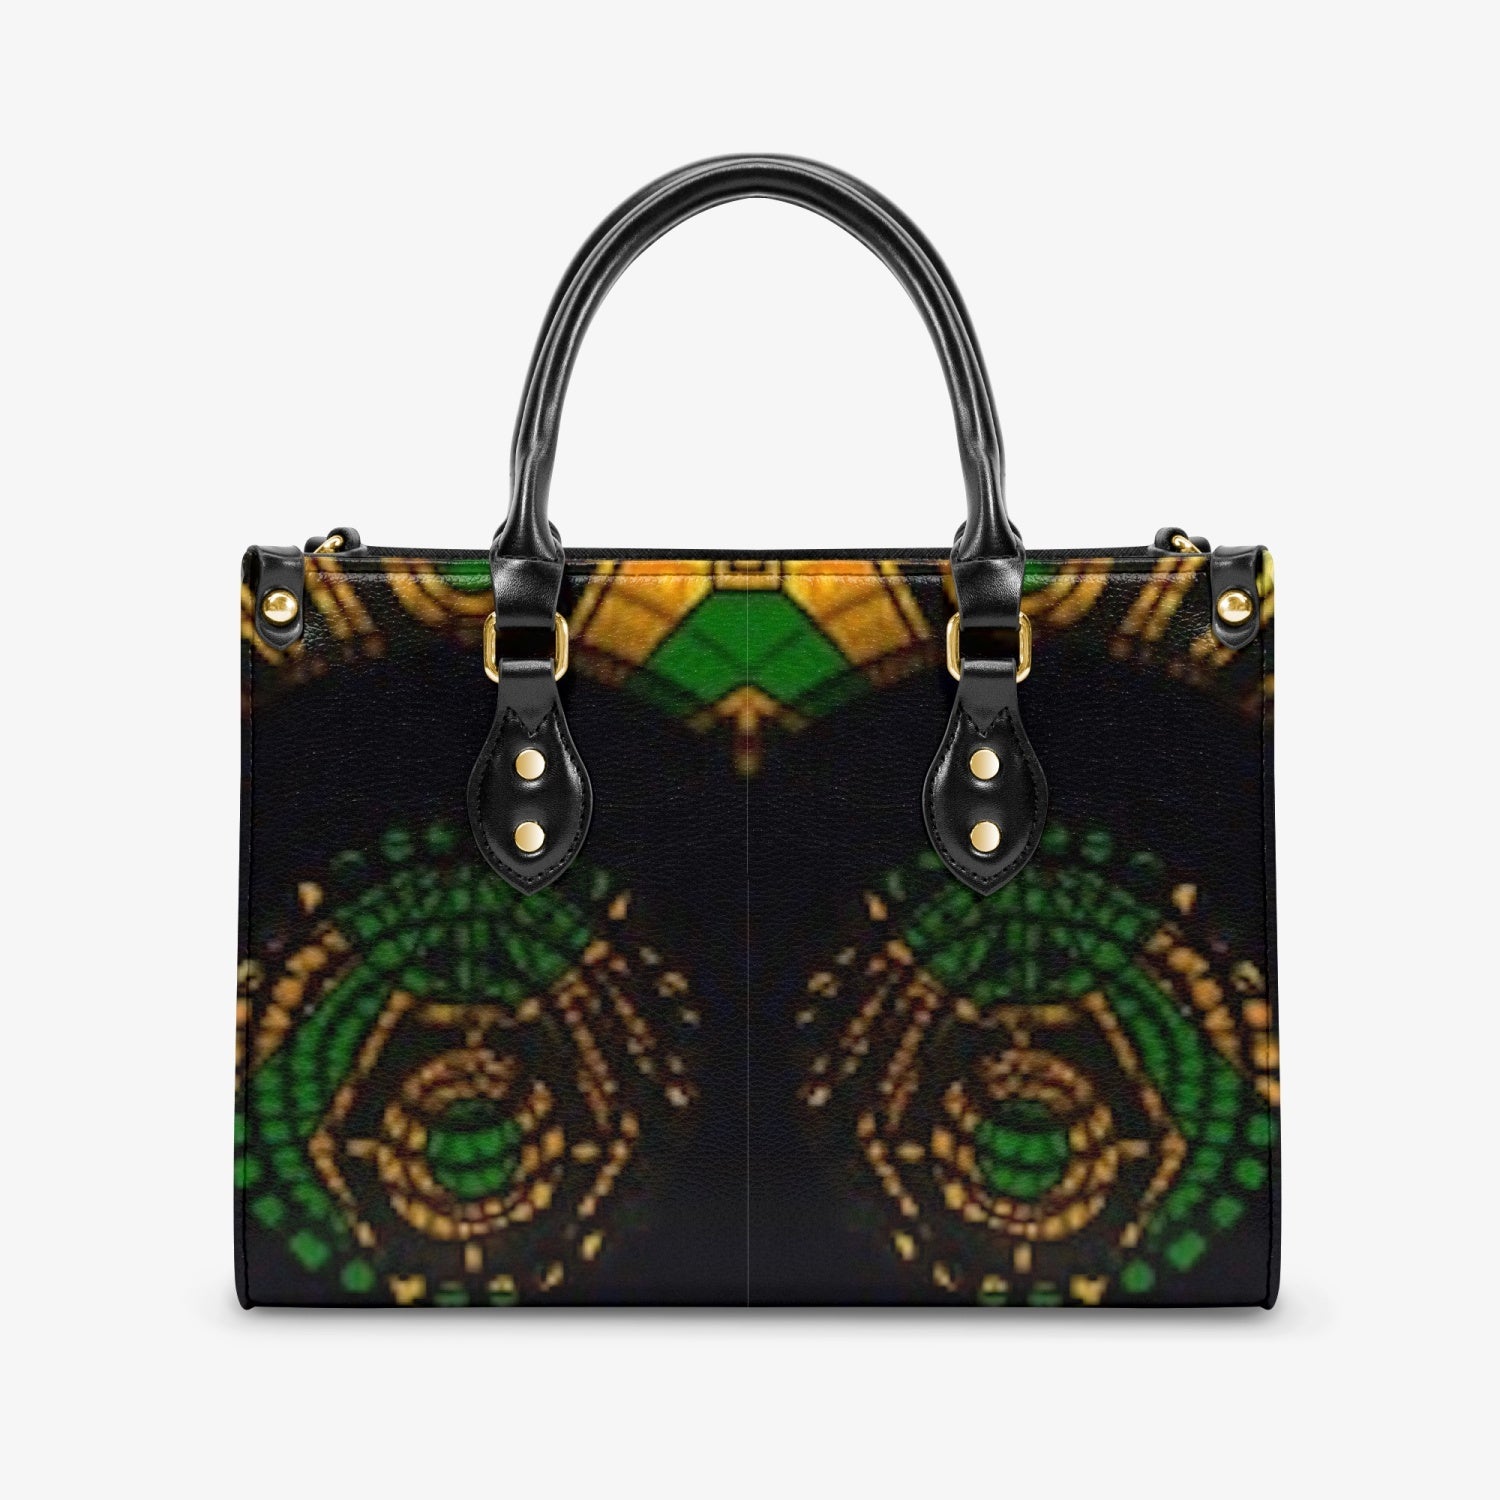 FZ Women's Concise Type African Print Tote Bag JetPrint